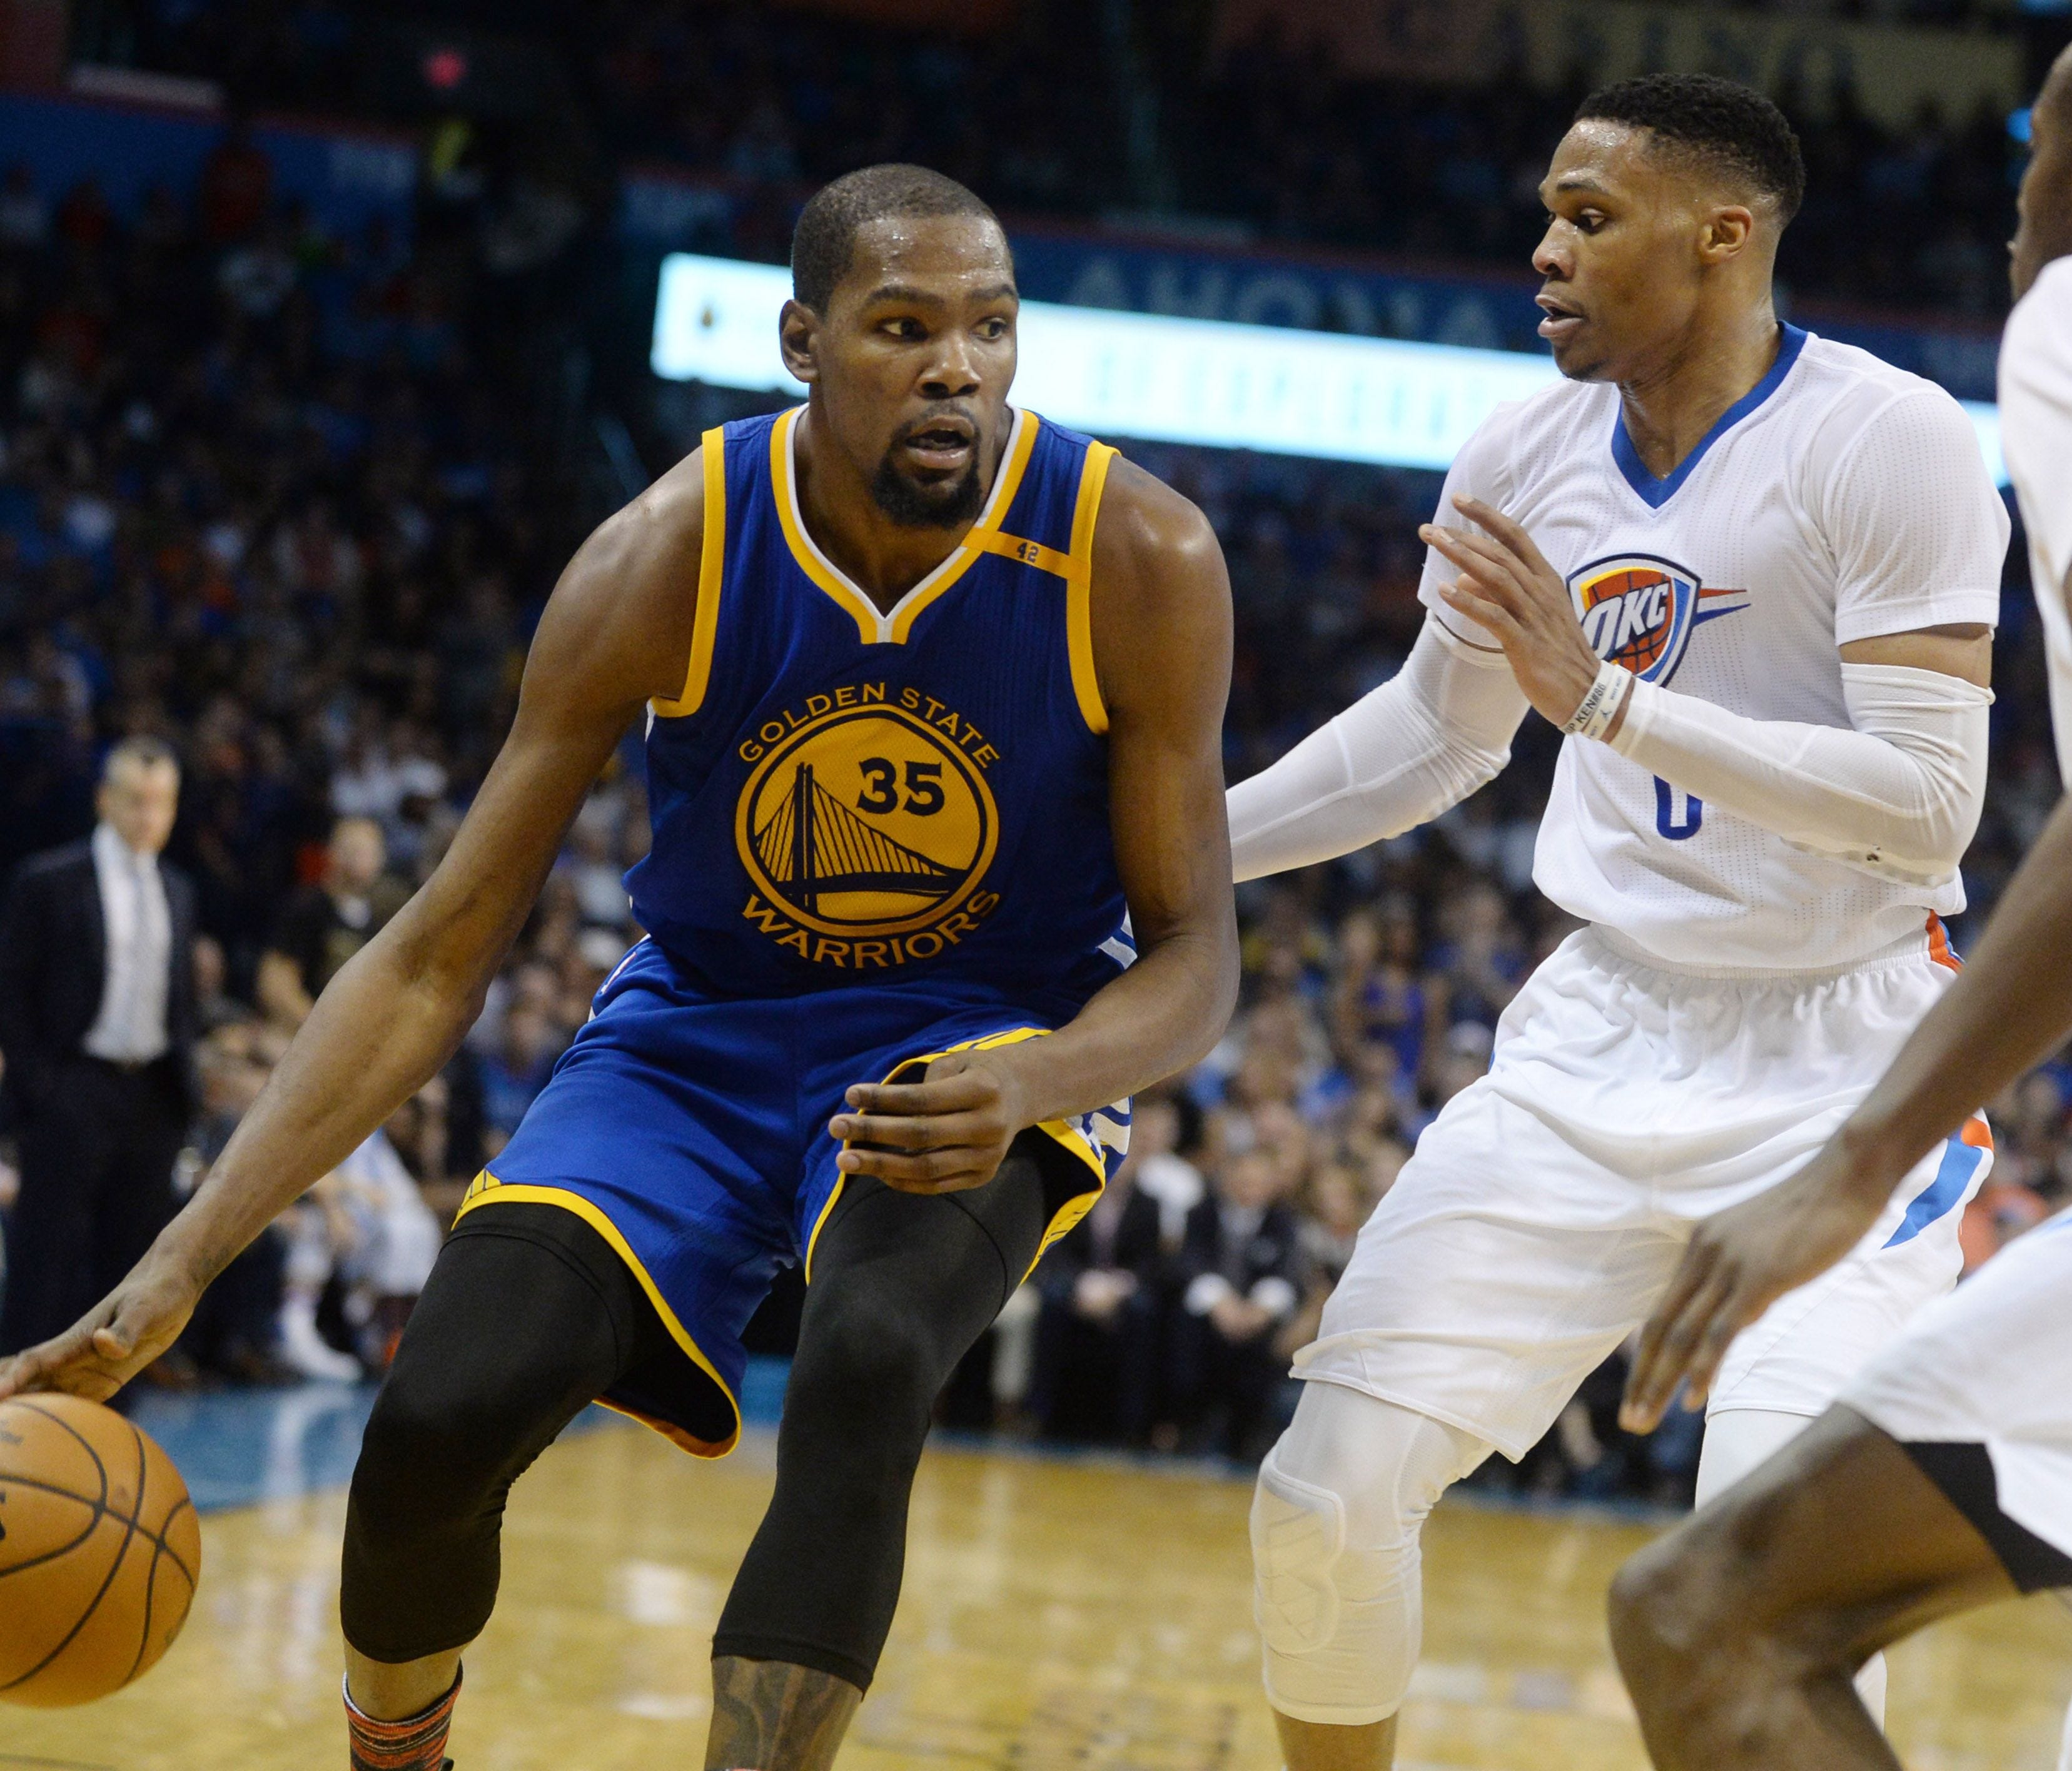 Golden State Warriors forward Kevin Durant fights for position with Oklahoma City Thunder guard Russell Westbrook during the second quarter at Chesapeake Energy Arena.